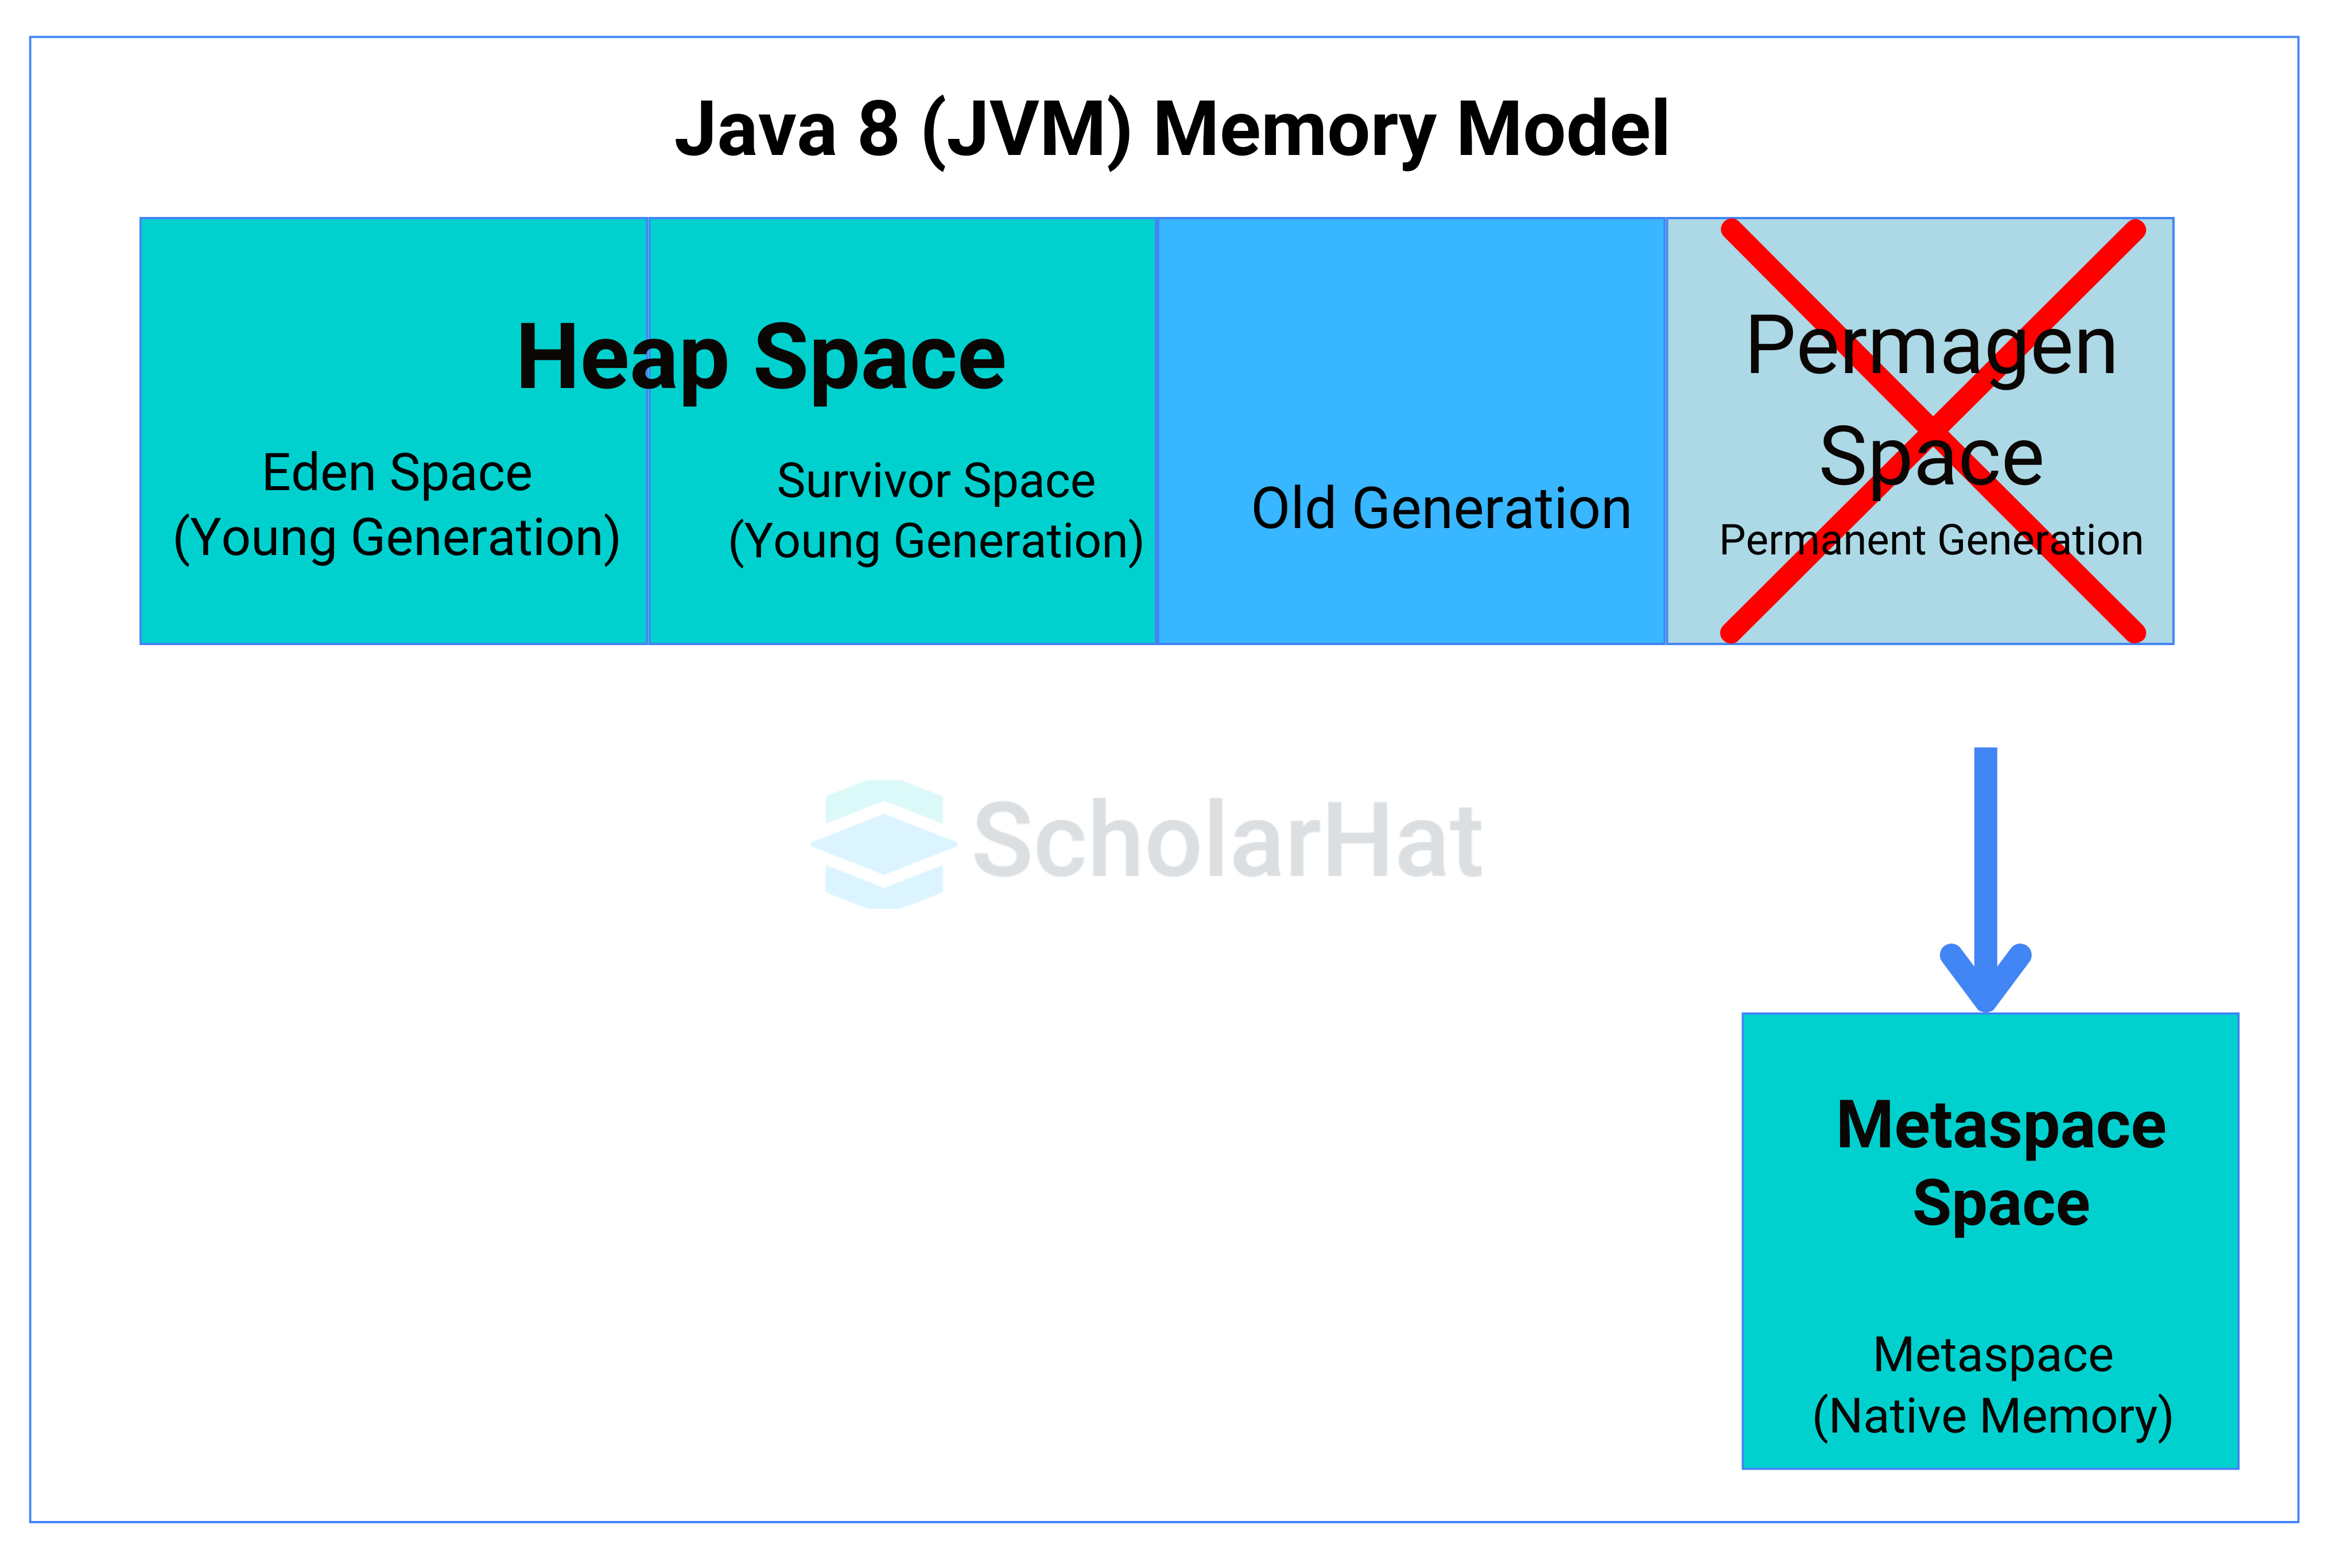 What is MetaSpace in Java 8? How does it differ from PermGen?